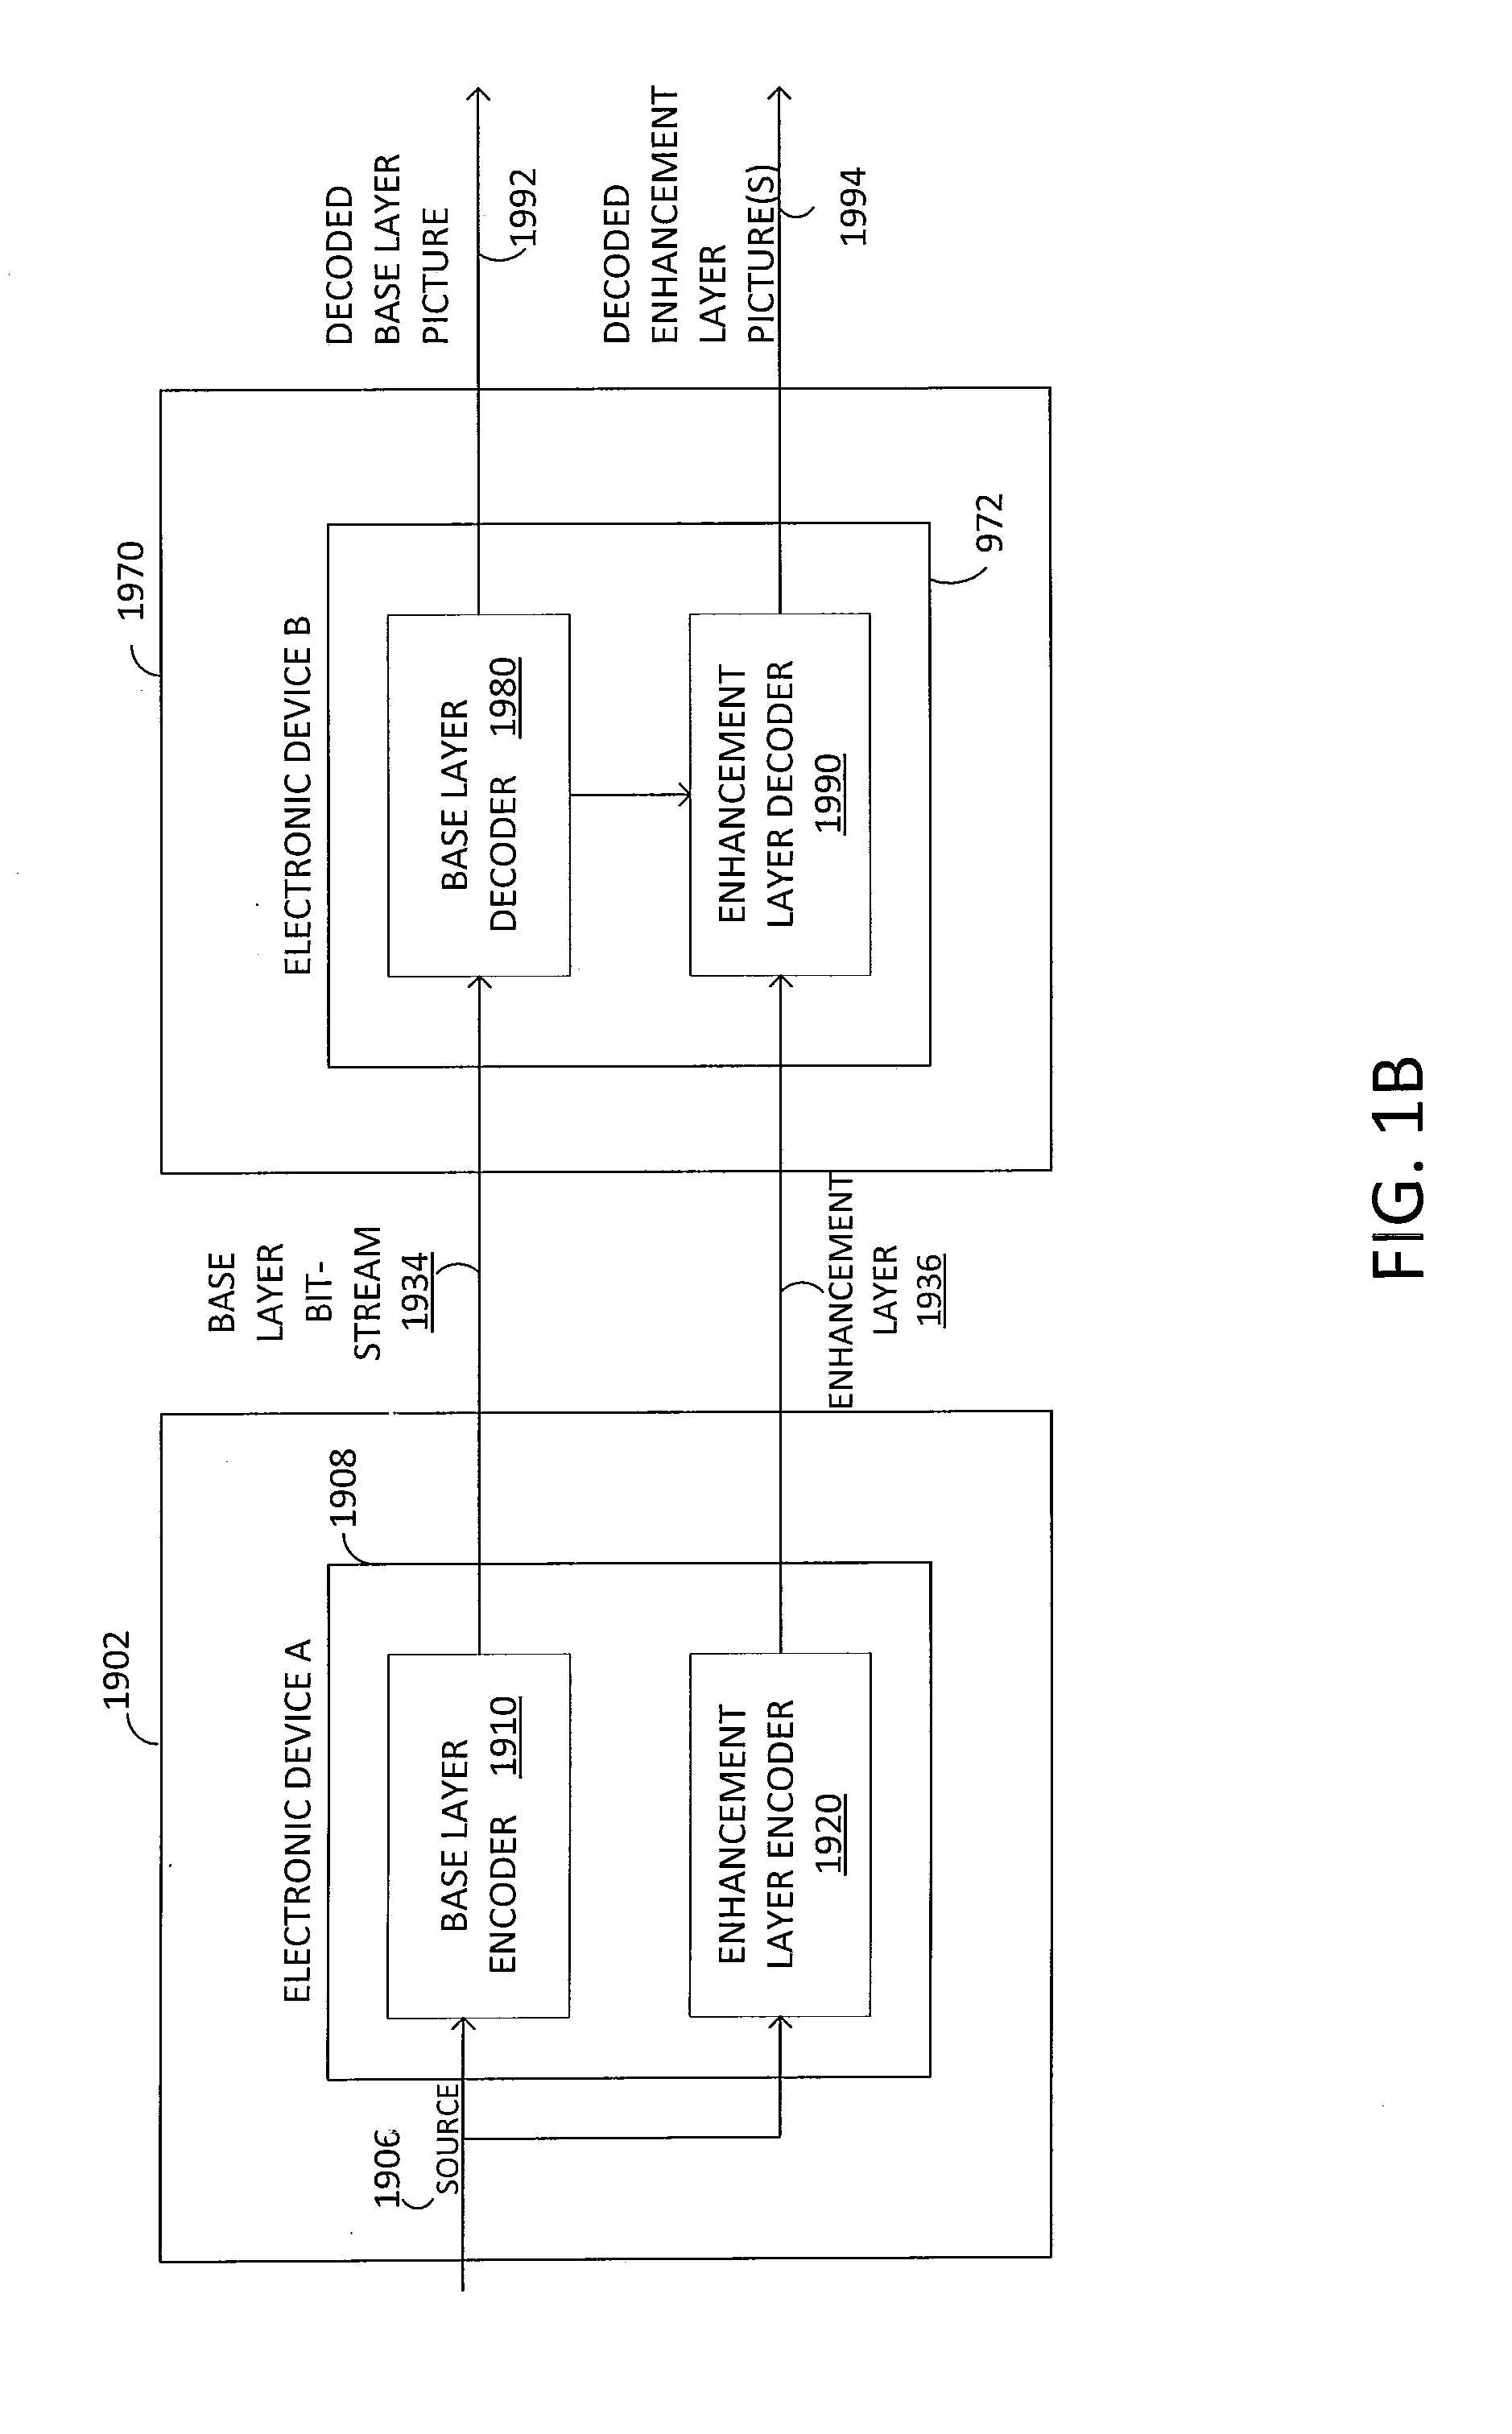 Signaling dpb parameters in vps extension and dpb operation